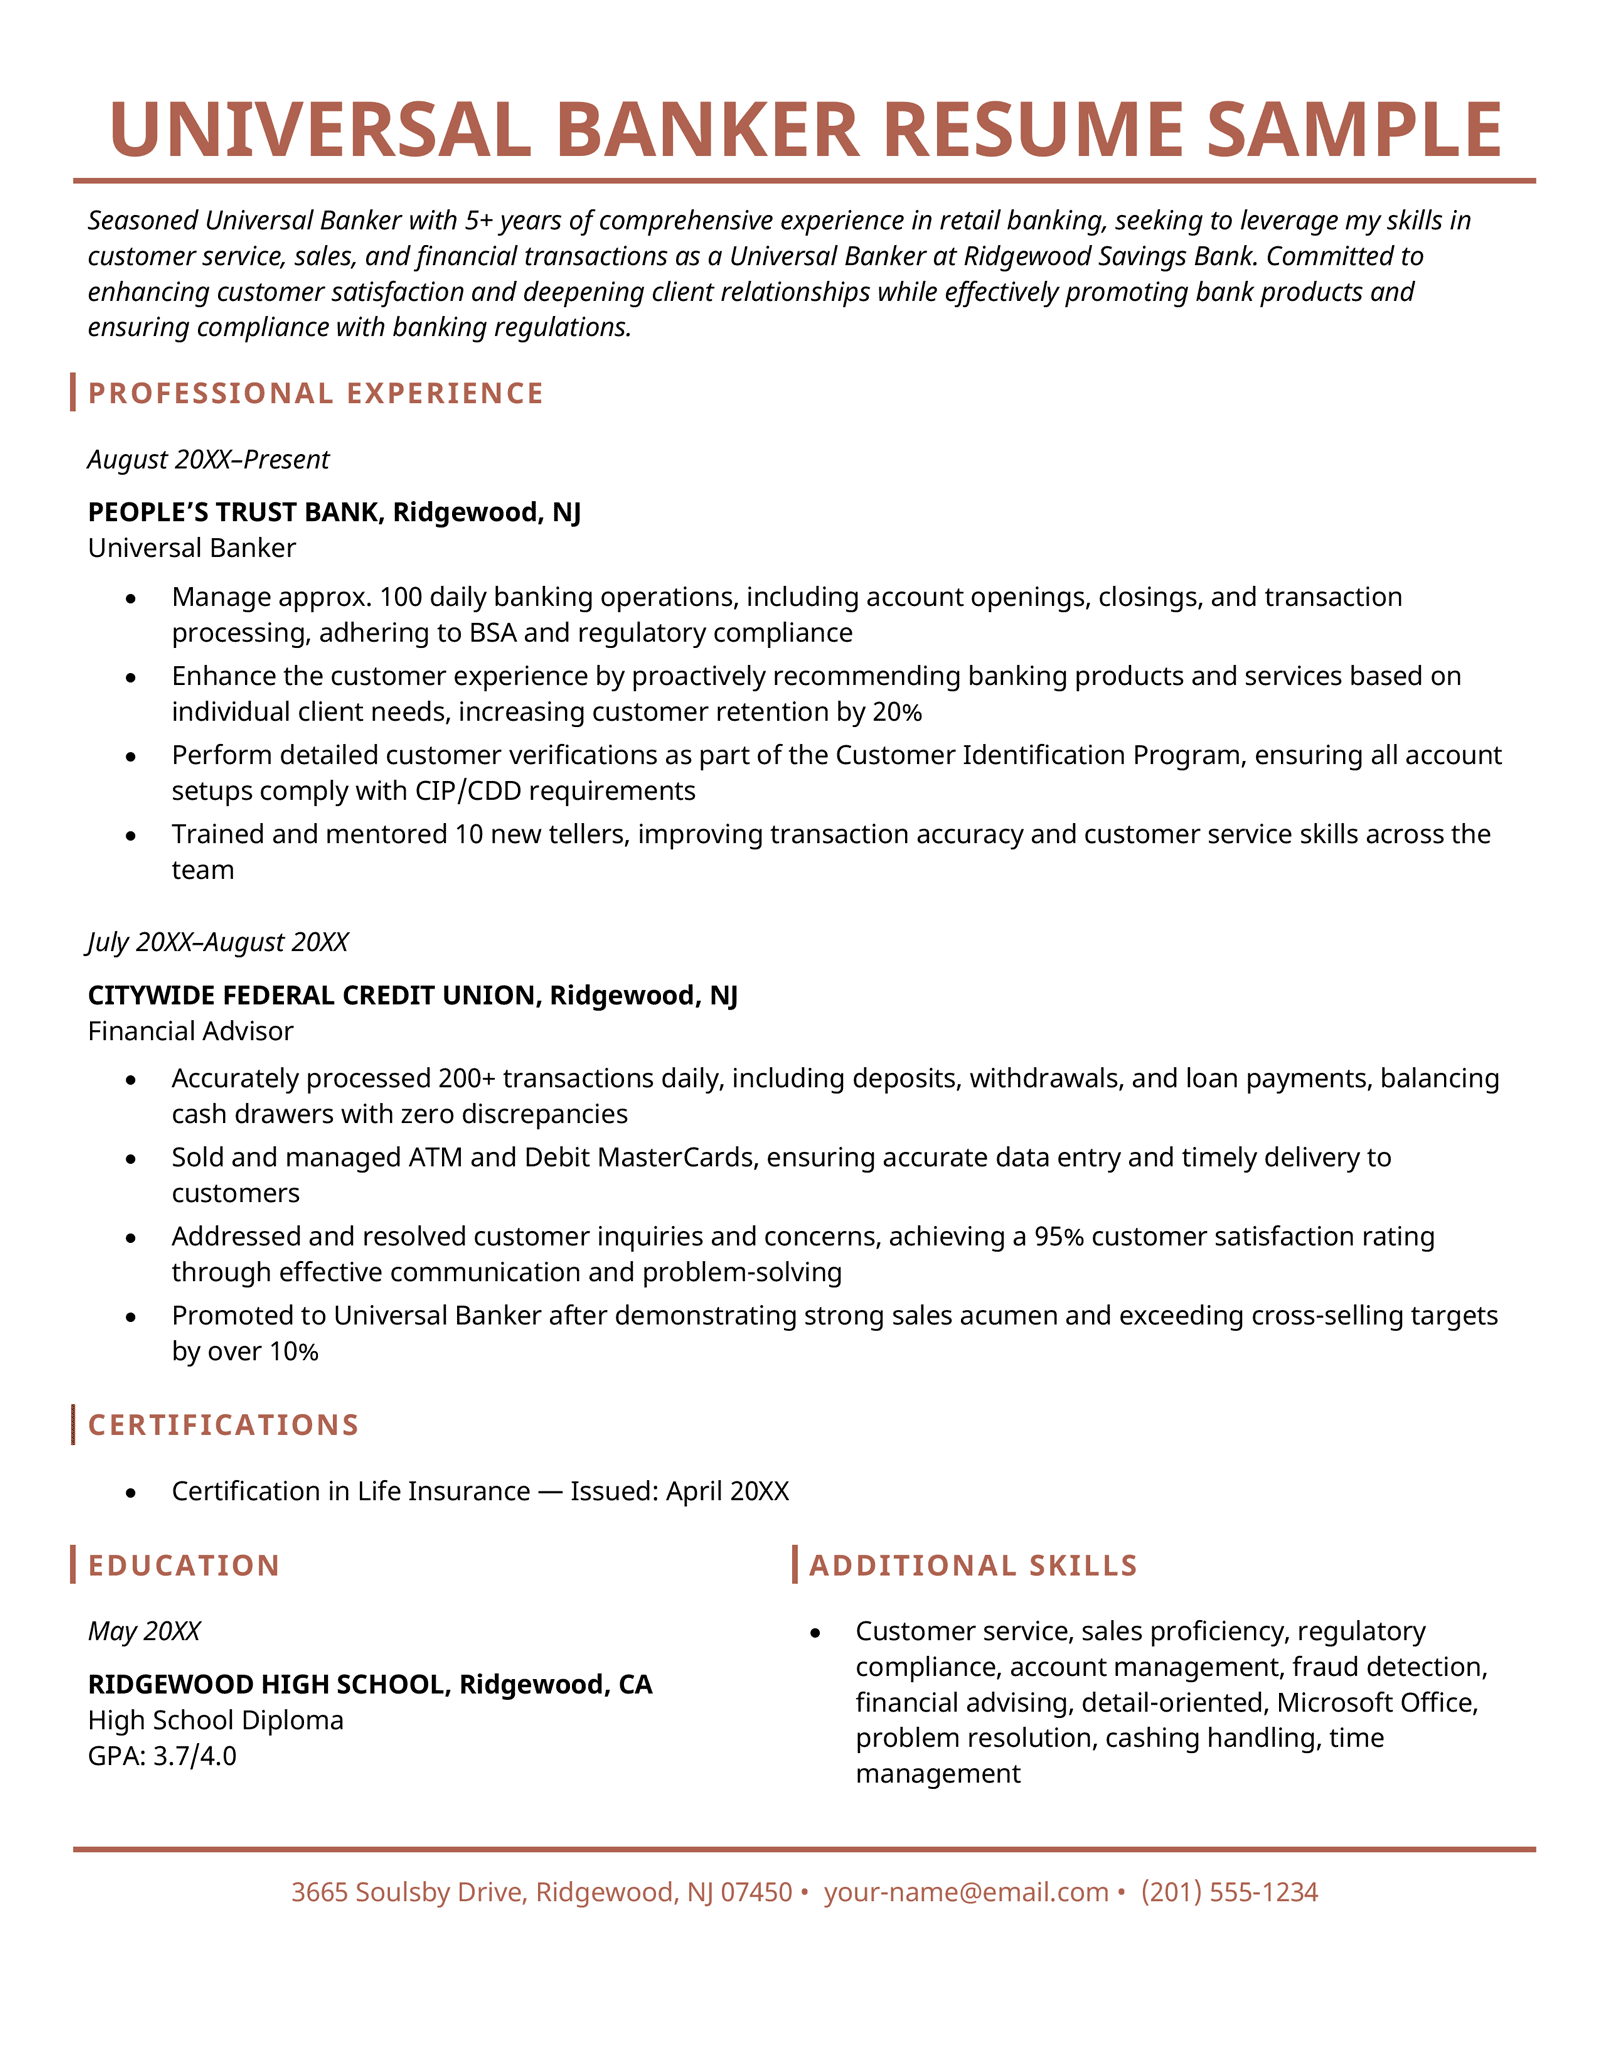 A universal banker resume sample using a maroon color scheme and varying between a one-column and two-column layout.